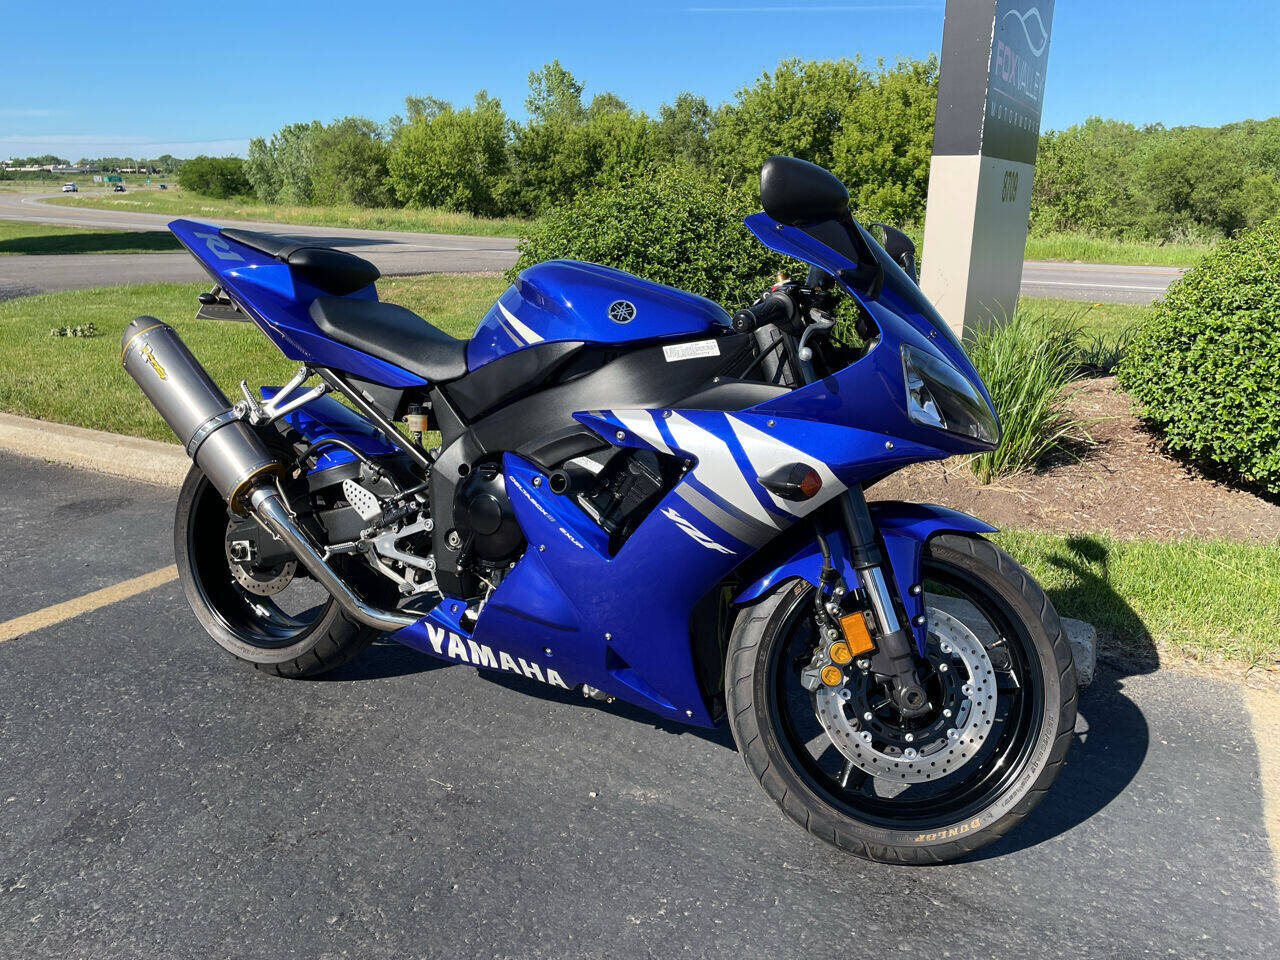 Yamaha YZF-R1 For Sale In Chicago